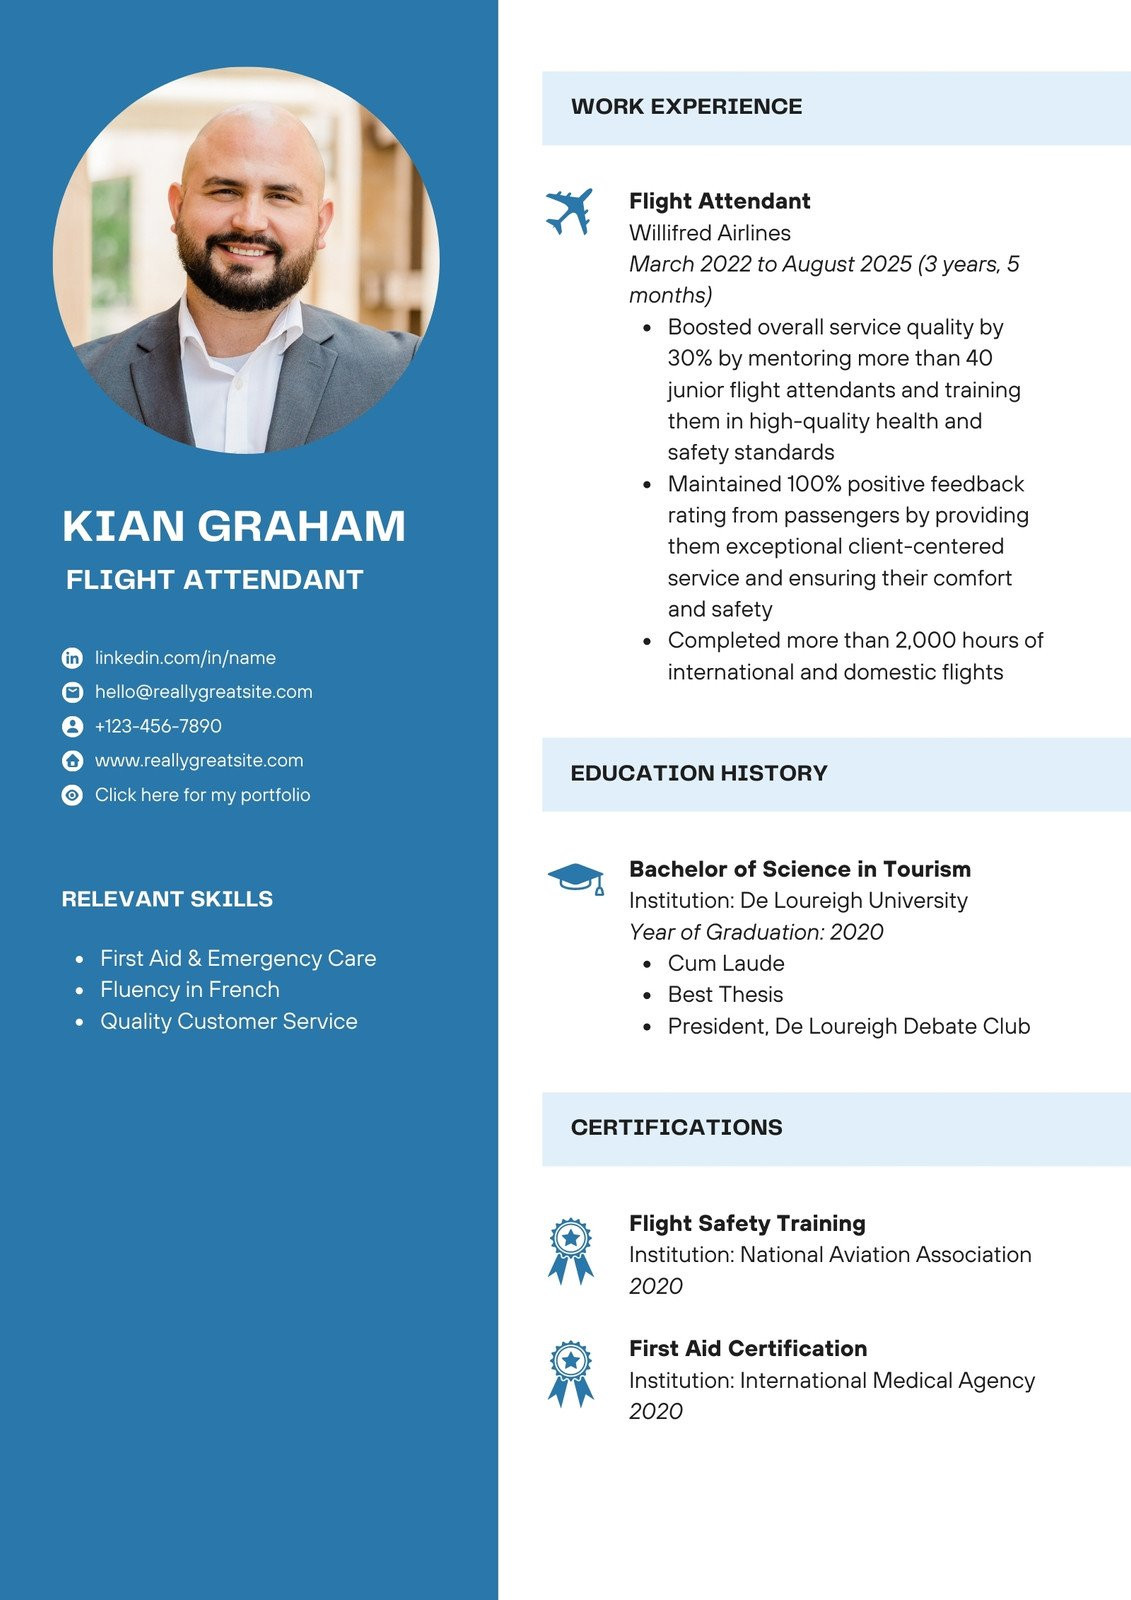 Sample Resume for Freshers with Photo attached Free, Printable, Customizable Photo Resume Templates Canva